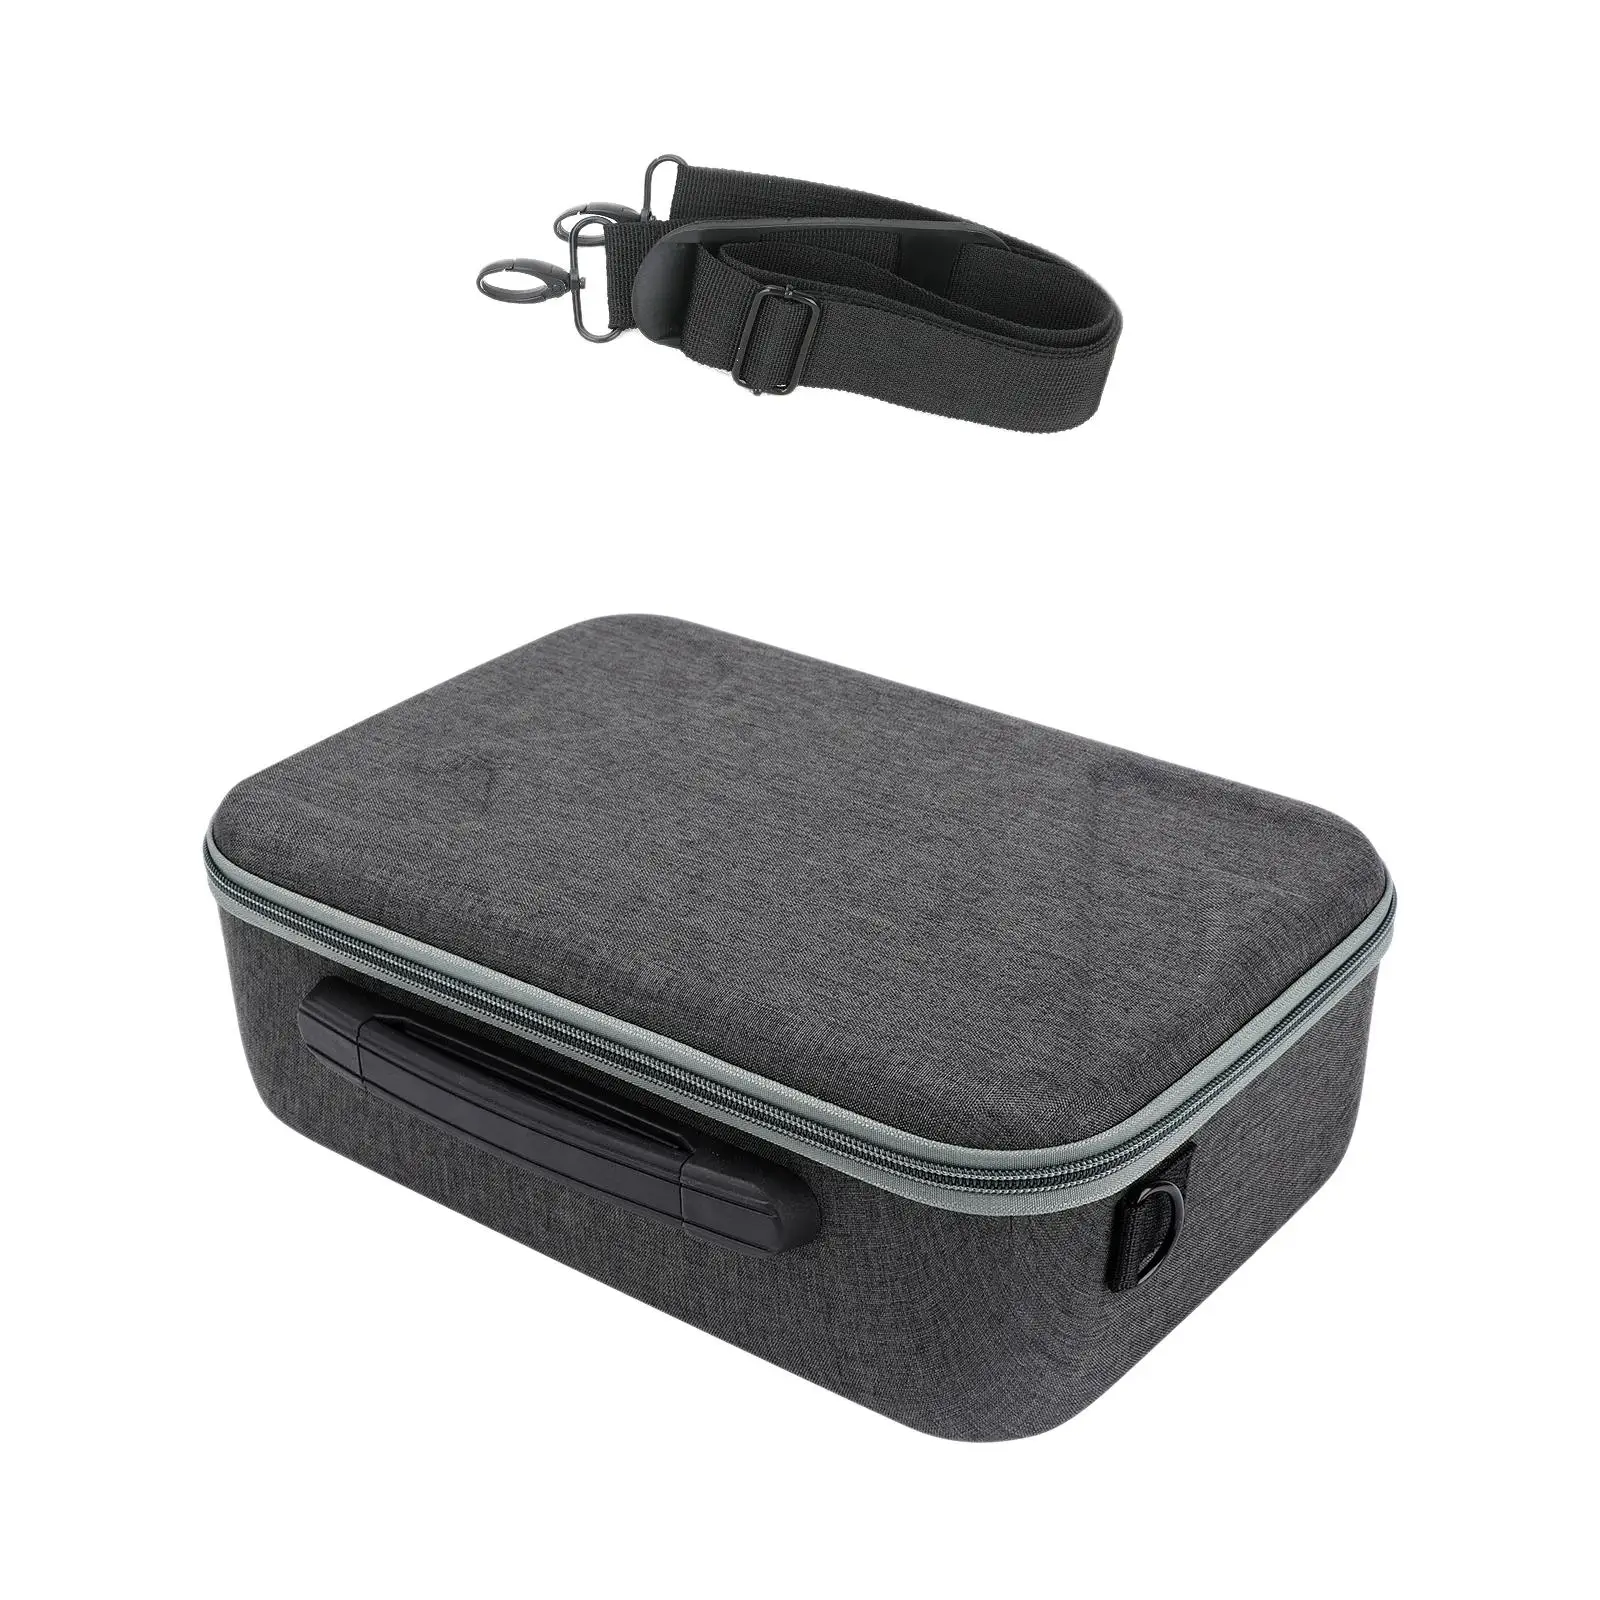 Travel Storage Carrying Case Bag for RS 3 Mini Accessories Color Black with Comfortable Handle